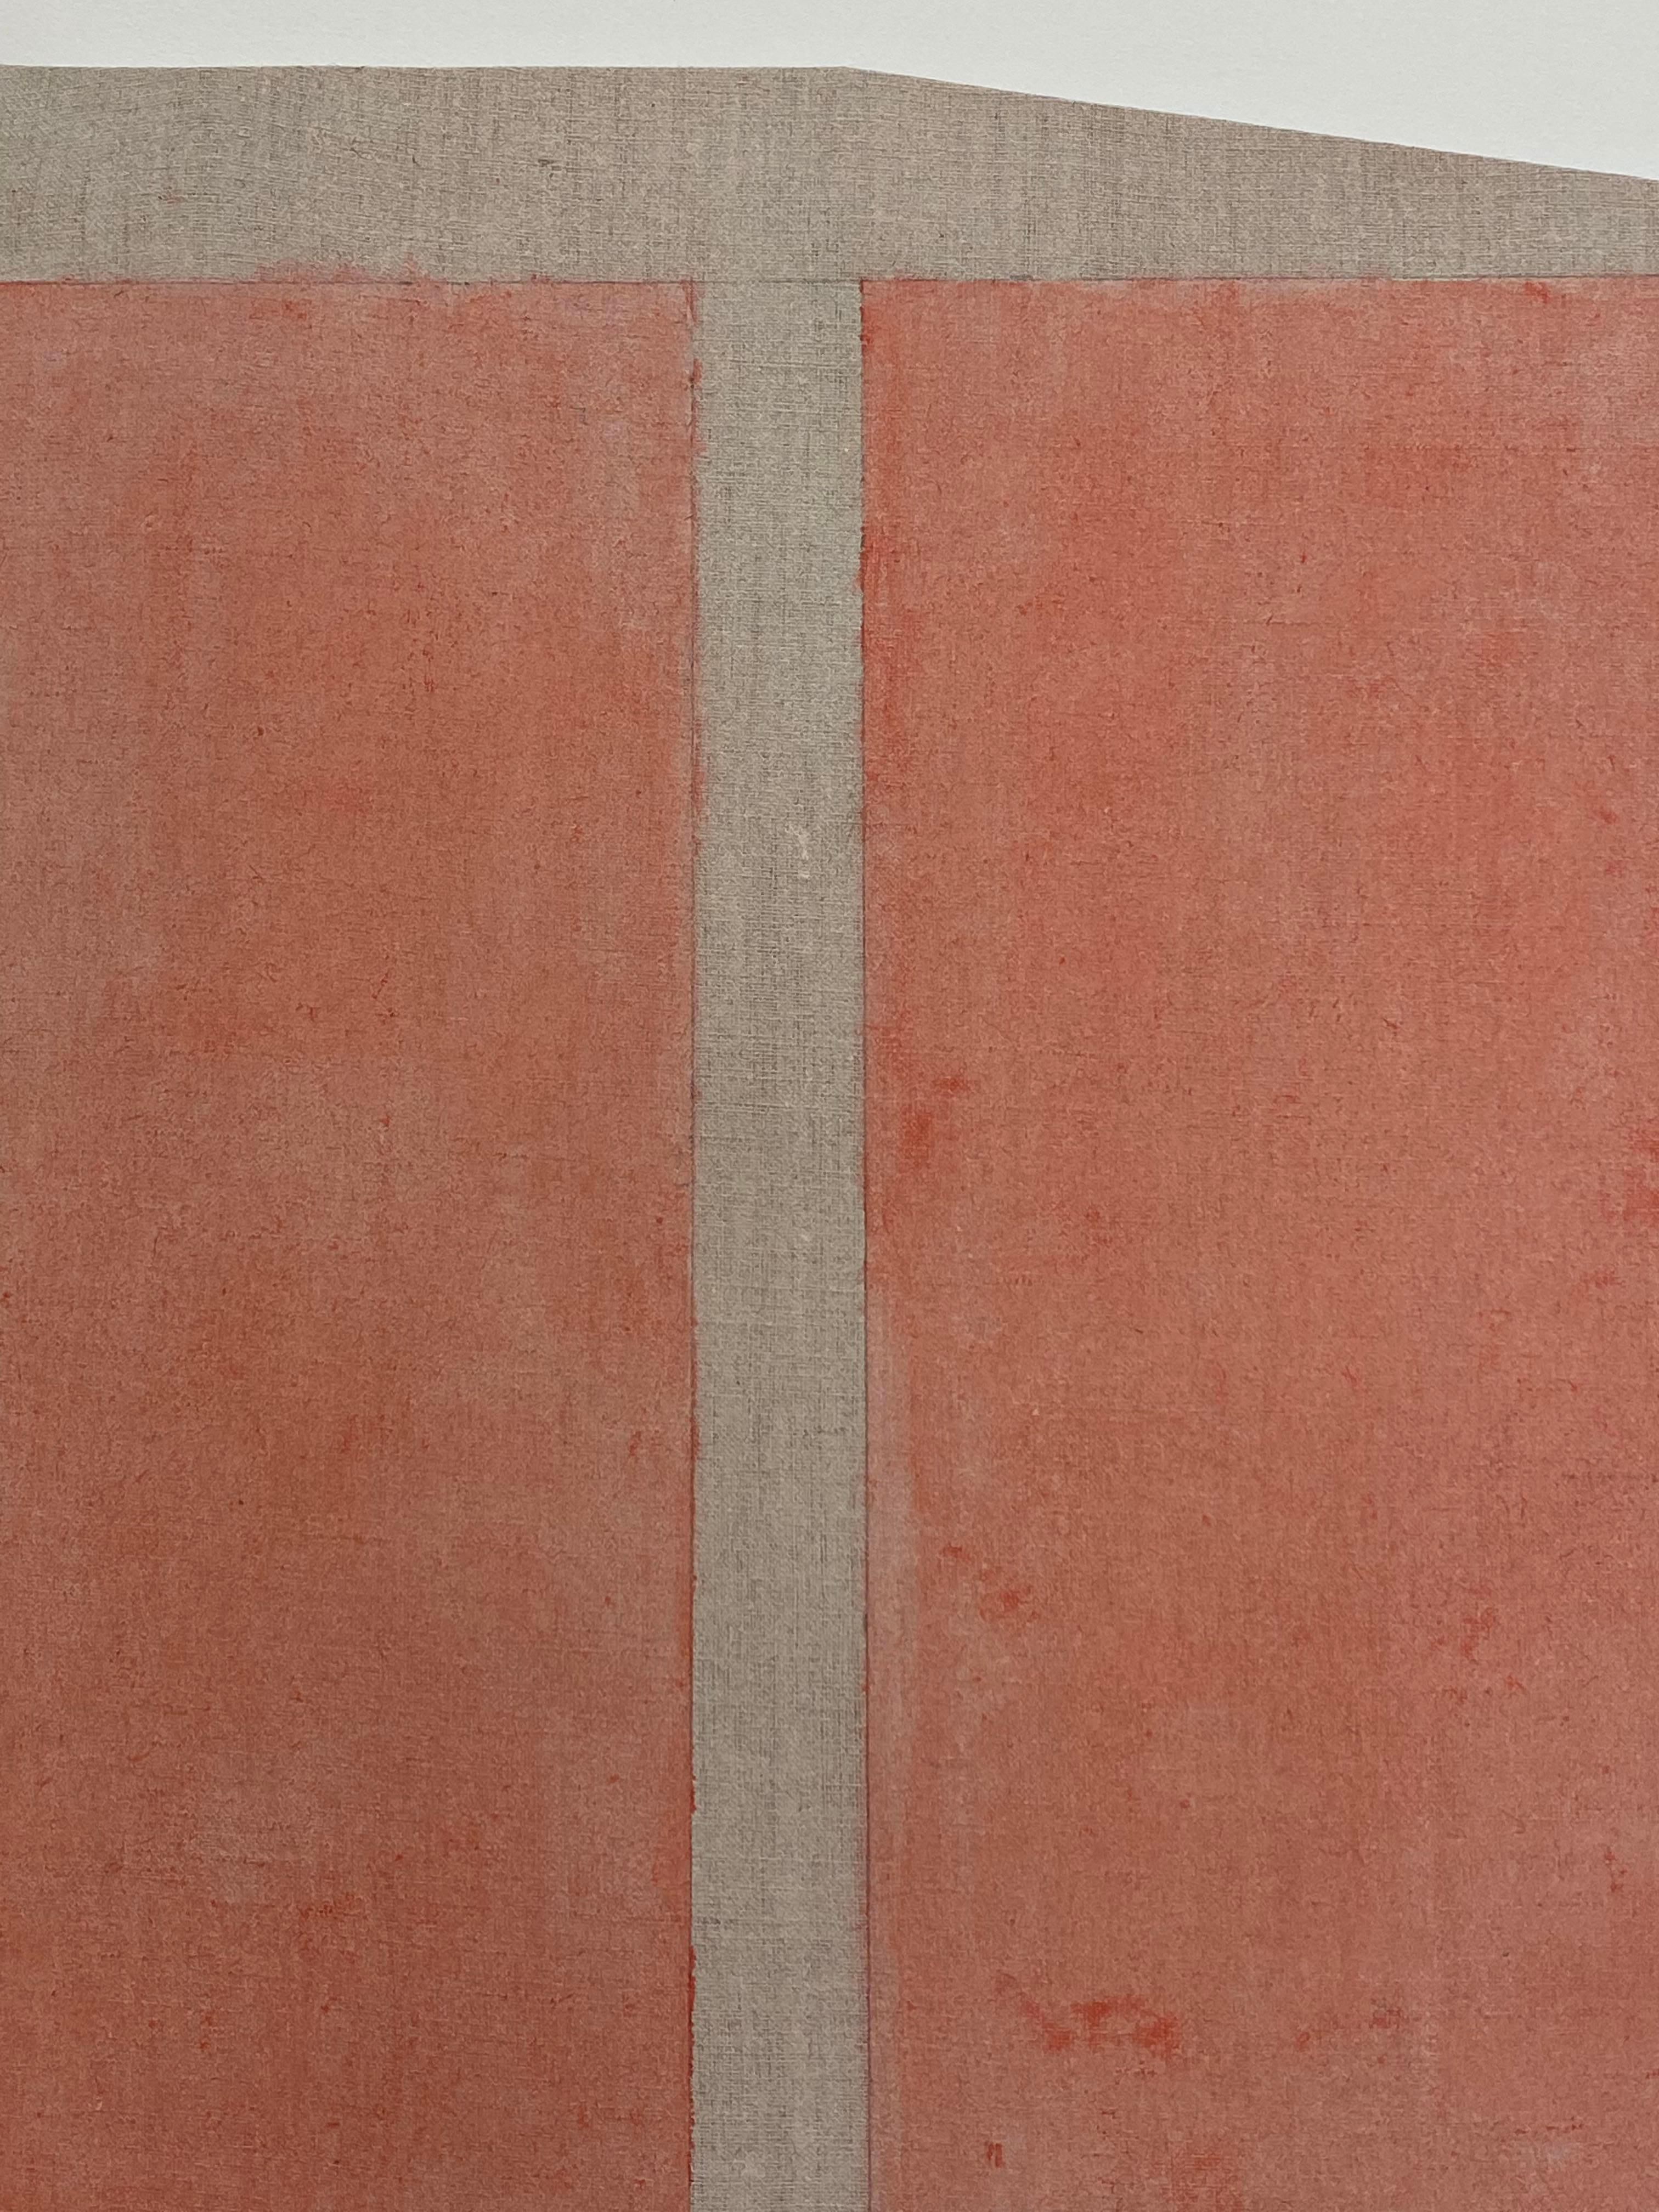 Cinnabar, Geometric Abstract, Coral Orange and Beige, Shaped Panel 1